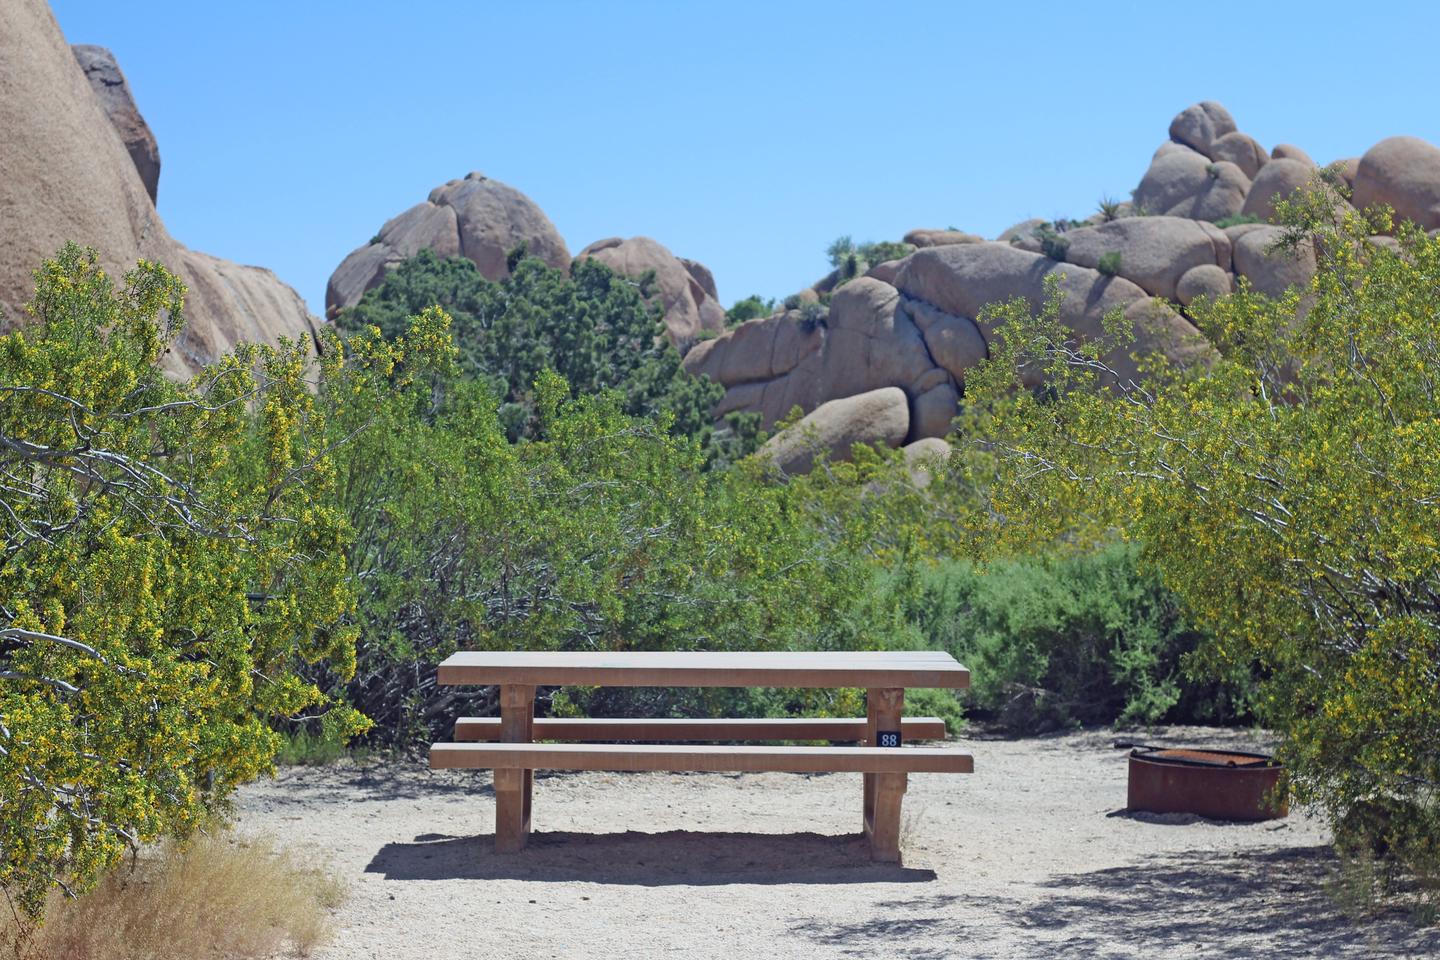 Campsite with picnic table surrounded by boulders and green plants.Campsite.